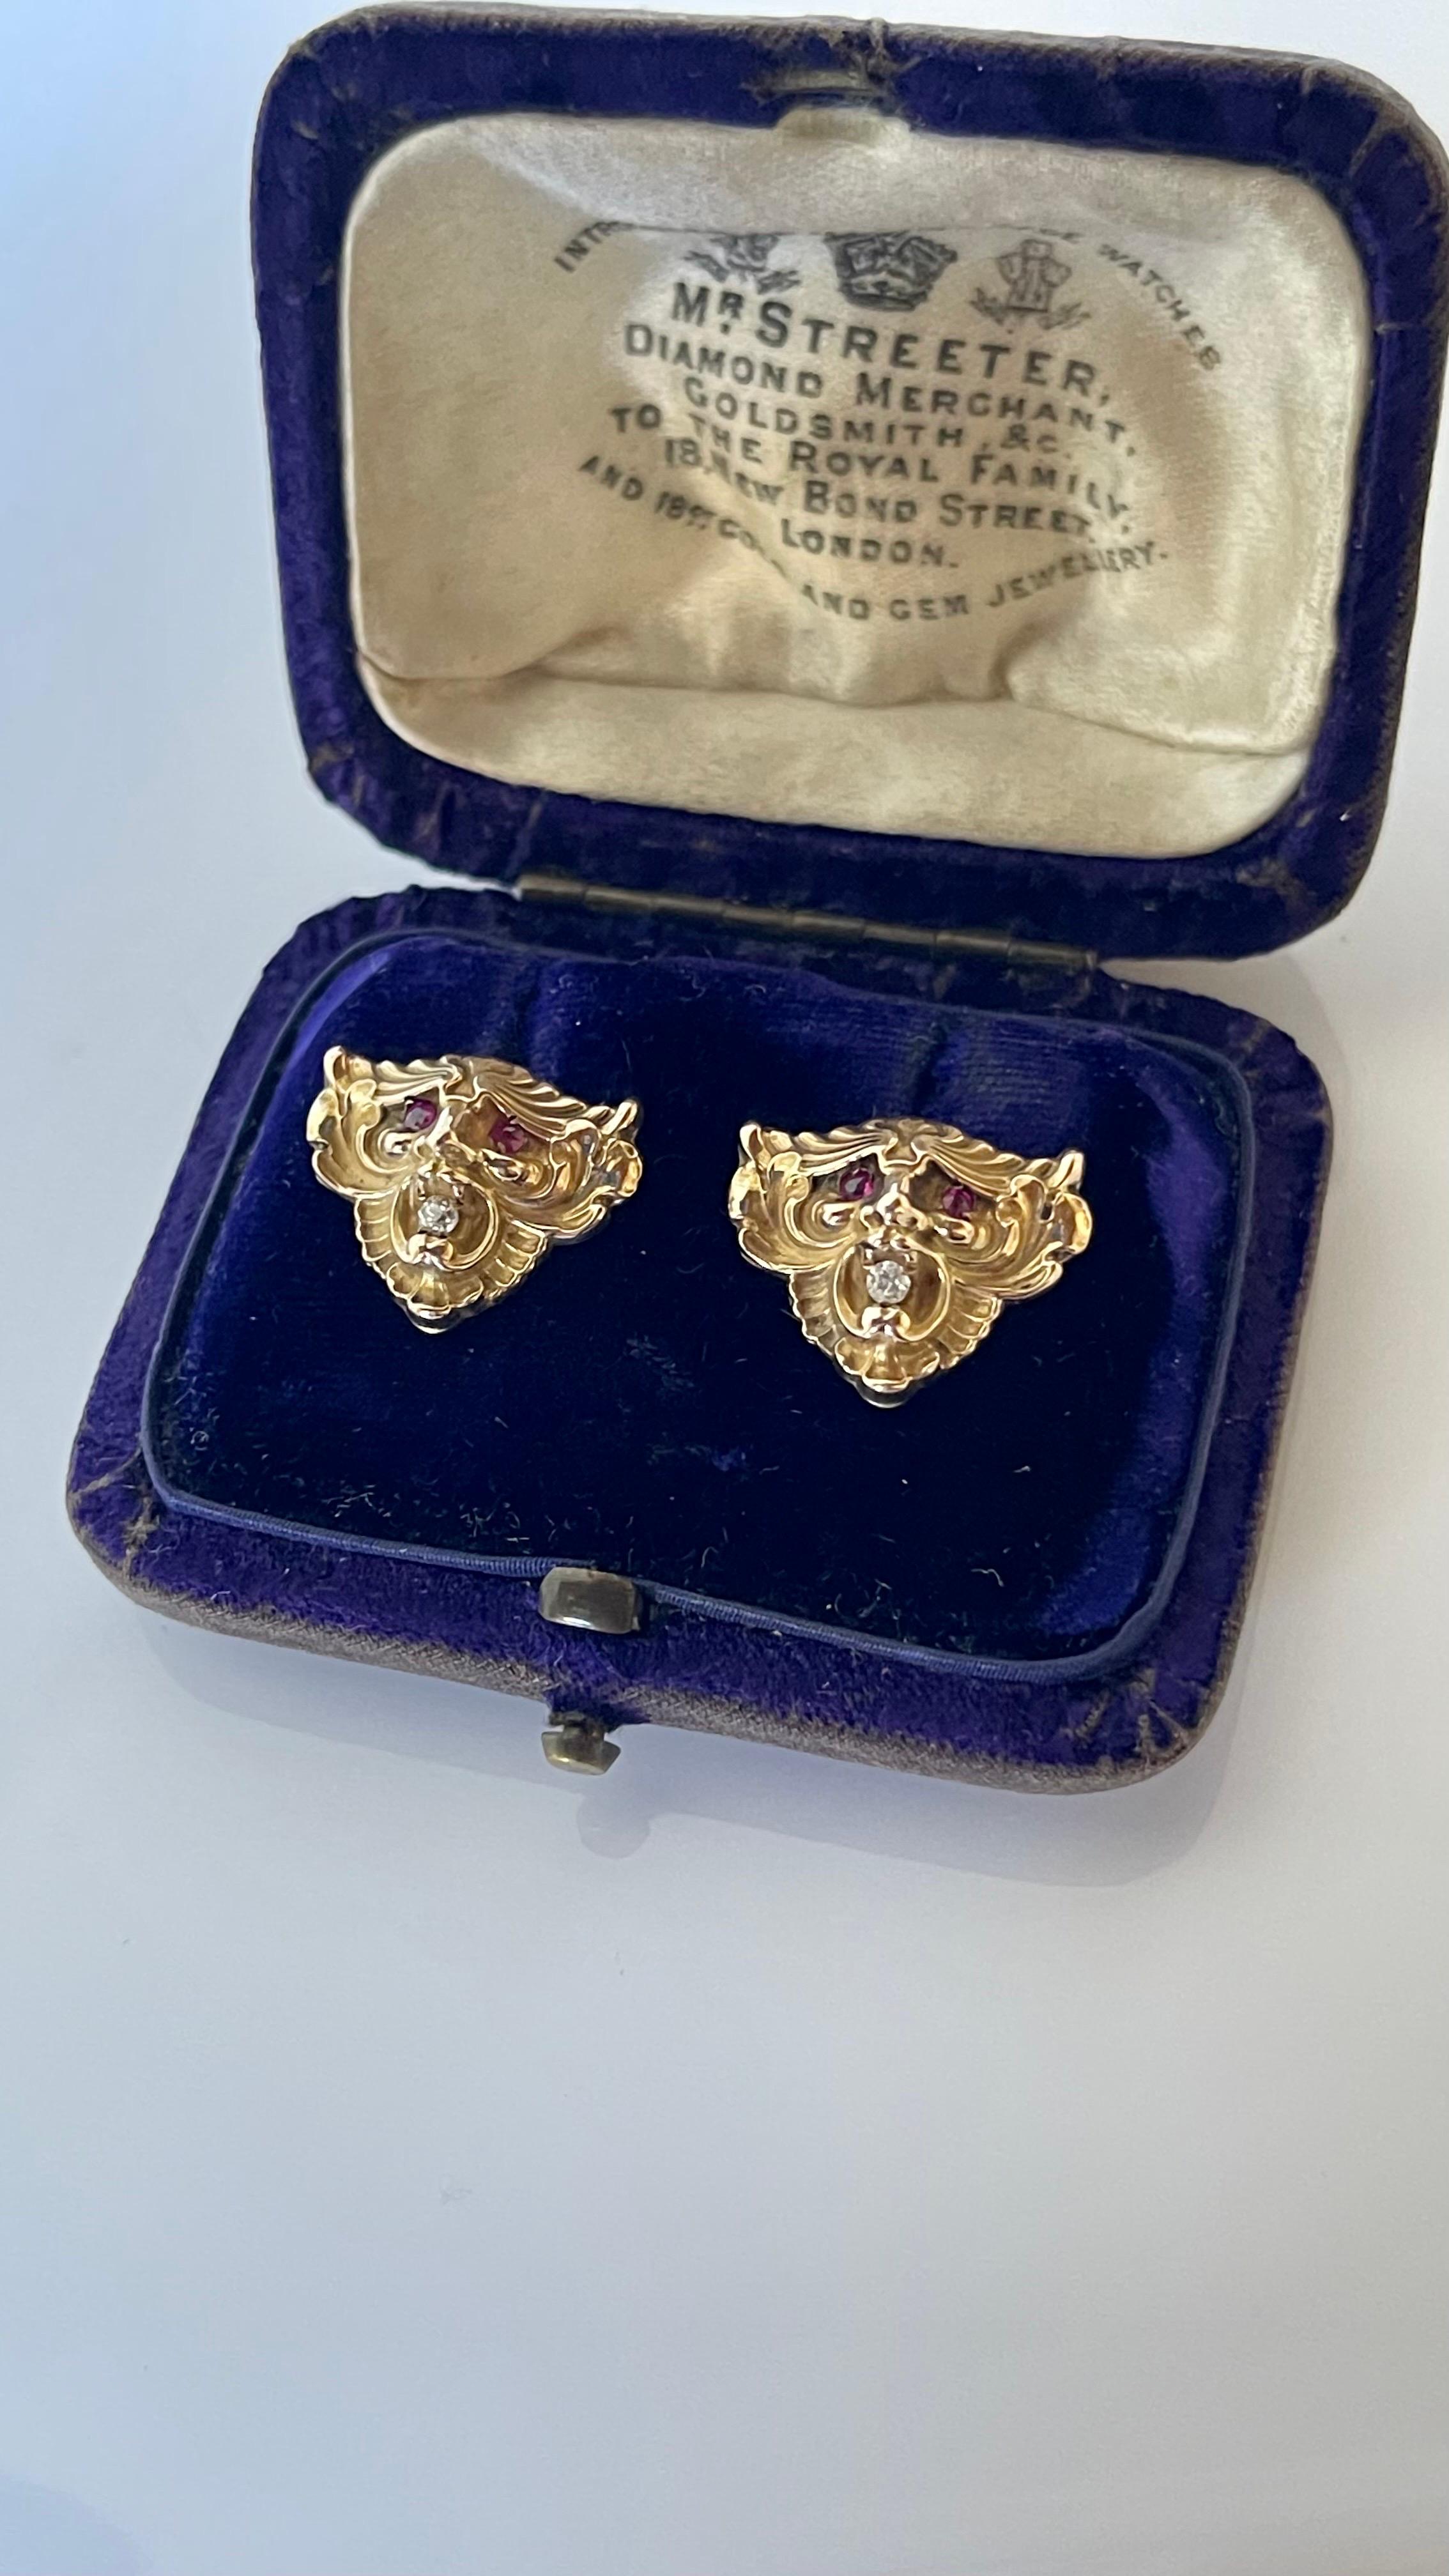 Antique Art Nouveau C 1900 14K gold lion head stud earrings, each designed as a winged lion head with ruby eyes and an old European cut diamond in its open mouth. Probably American, tested at 14K gold, fine detail and excellent condition.